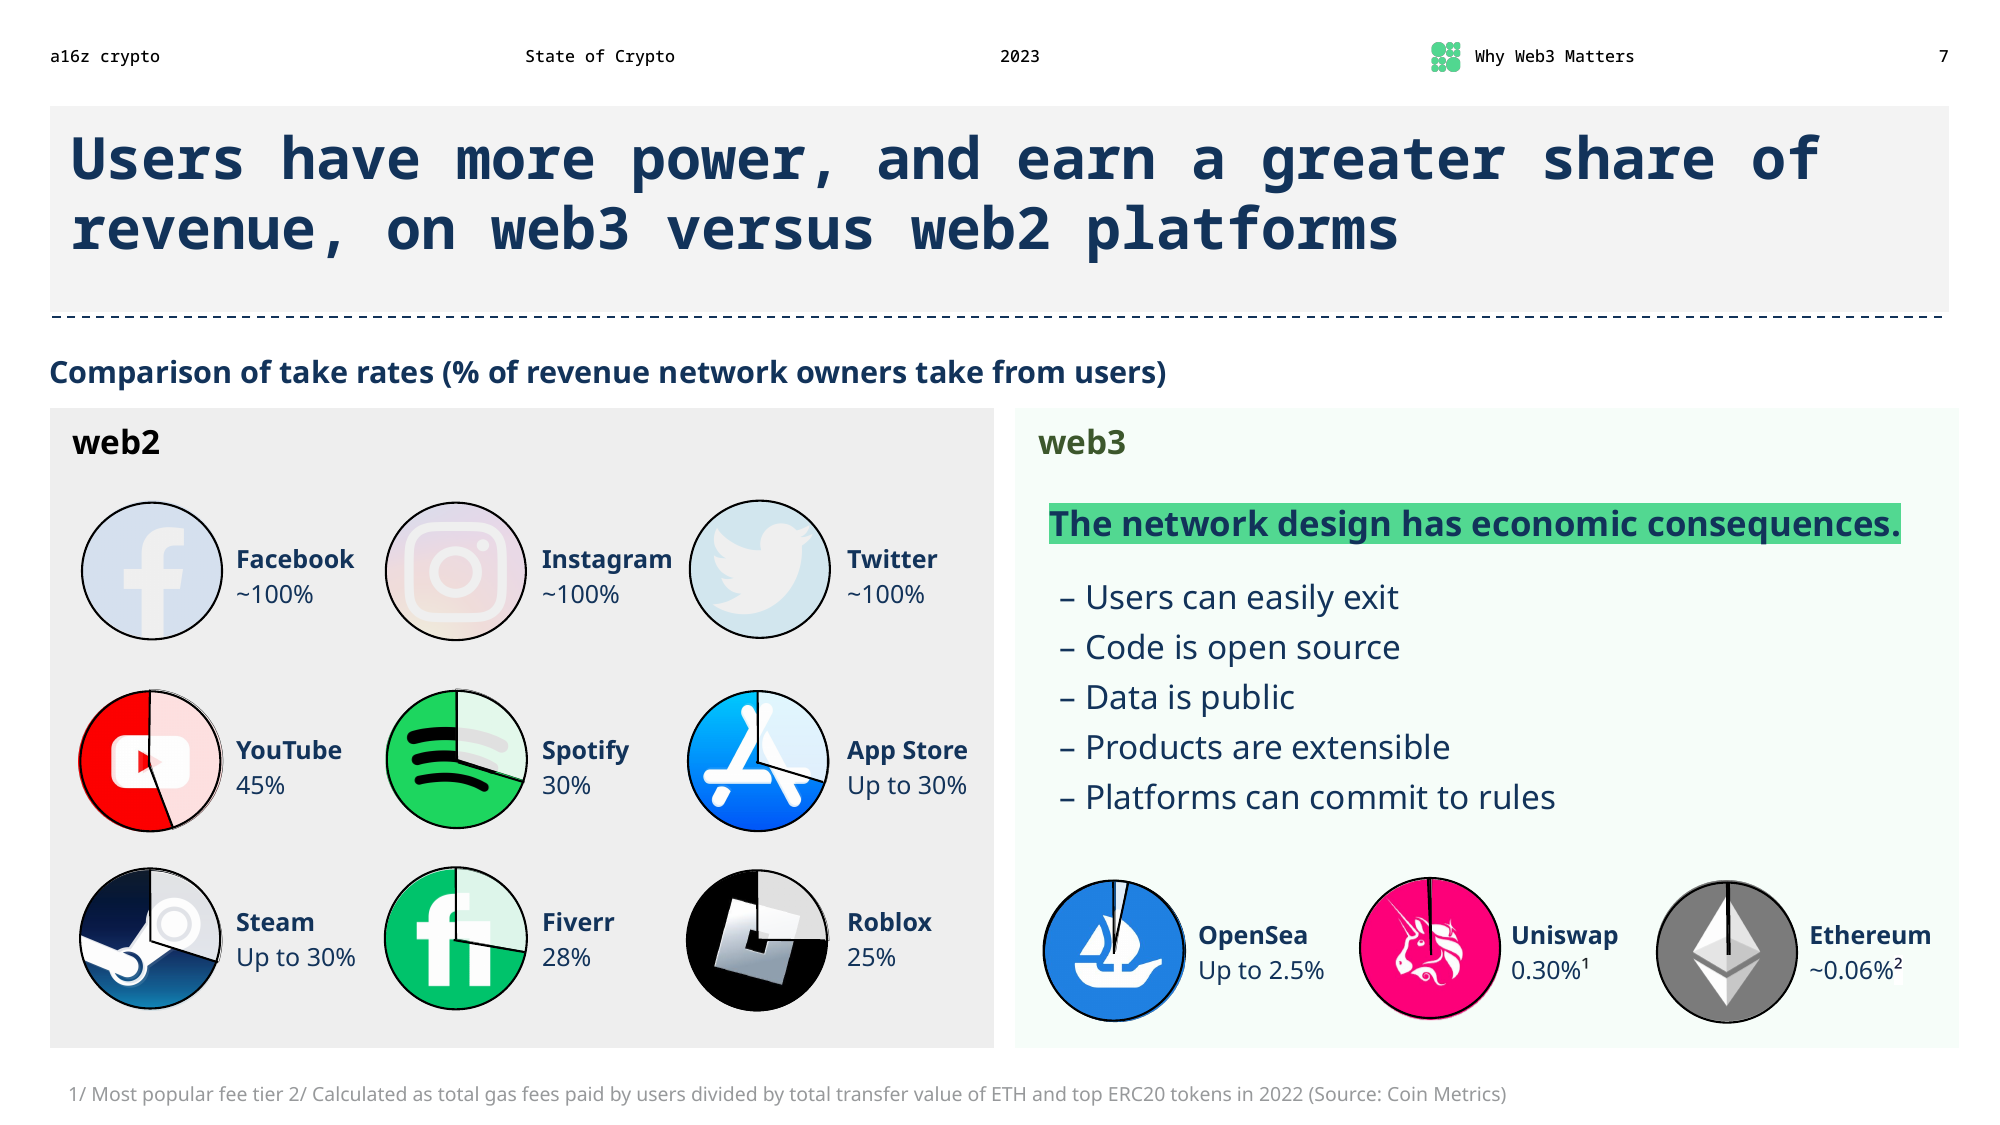 Users have more power, and earn a greater share of revenue, on web3 versus web2 platforms  Comparison of take rates (% of revenue network owners take from users)  web2 Facebook ~100% Instagram ~100% Twitter ~100% YouTube ~45% Spotify ~30% App Store Up to 30% Steam Up to 30% Fiverr 28% Roblox 25%  web3 The network design has economic consequences. – Users can easily exit – Code is open source – Data is public – Products are extensible – Platforms can commit to rules OpenSea Up to 2.5% Uniswap 0.30%¹ Ethereum 0.06%²  1/ Most popular fee tier 2/ Calculated as total gas fees paid by users divided by total transfer value of ETH and top ERC20 tokens (Source: Coin Metrics)